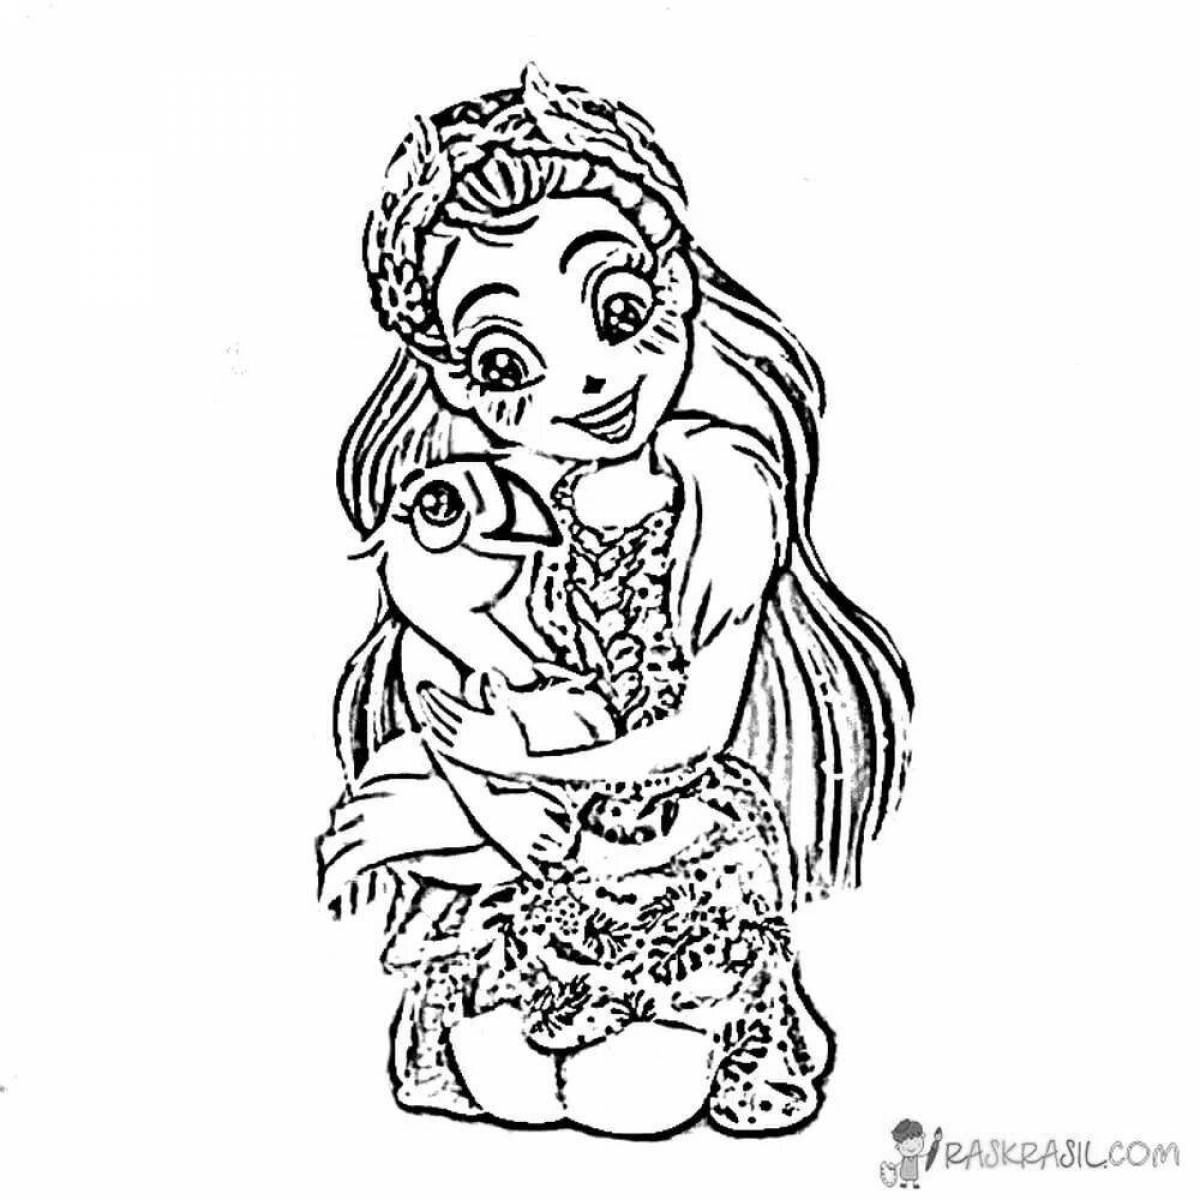 Jovial inchanchymus coloring page